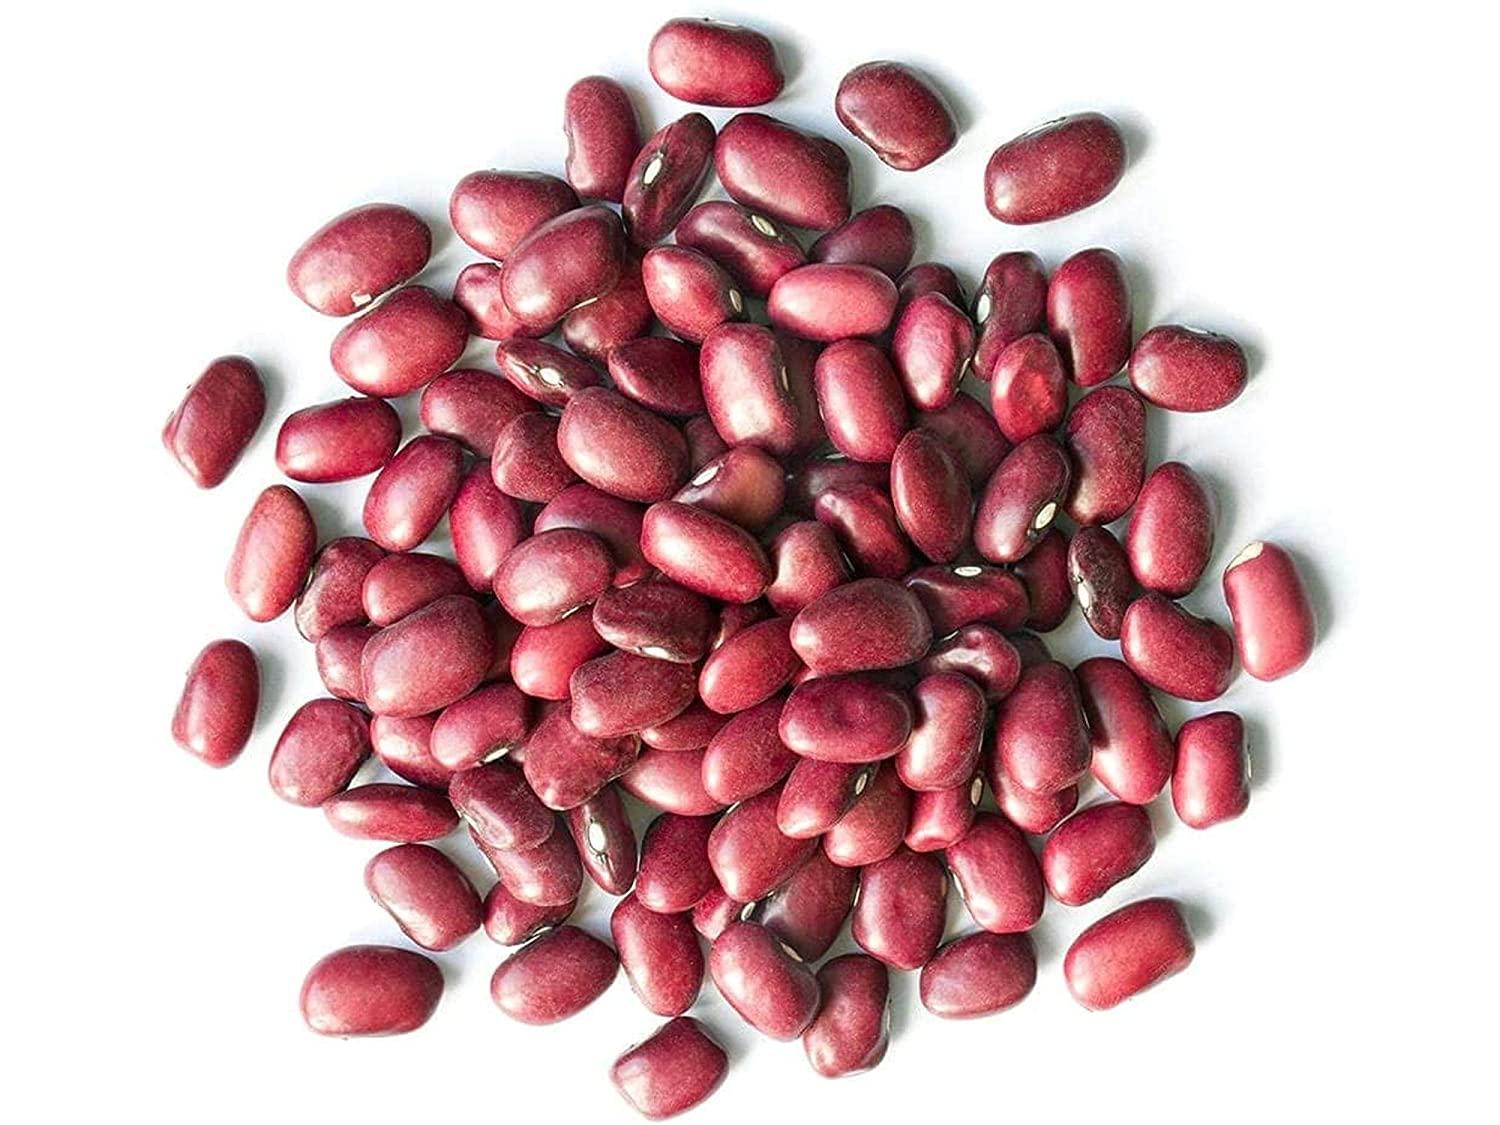 Adzuki Beans, 1 Pound Whole Dried Azuki Beans (Red Mung Beans), Raw, Vegan, Kosher, Sproutable, Bulk. Rich Dietary Fiber and Perfect for Red Bean Paste, and Asian Dishes. 1